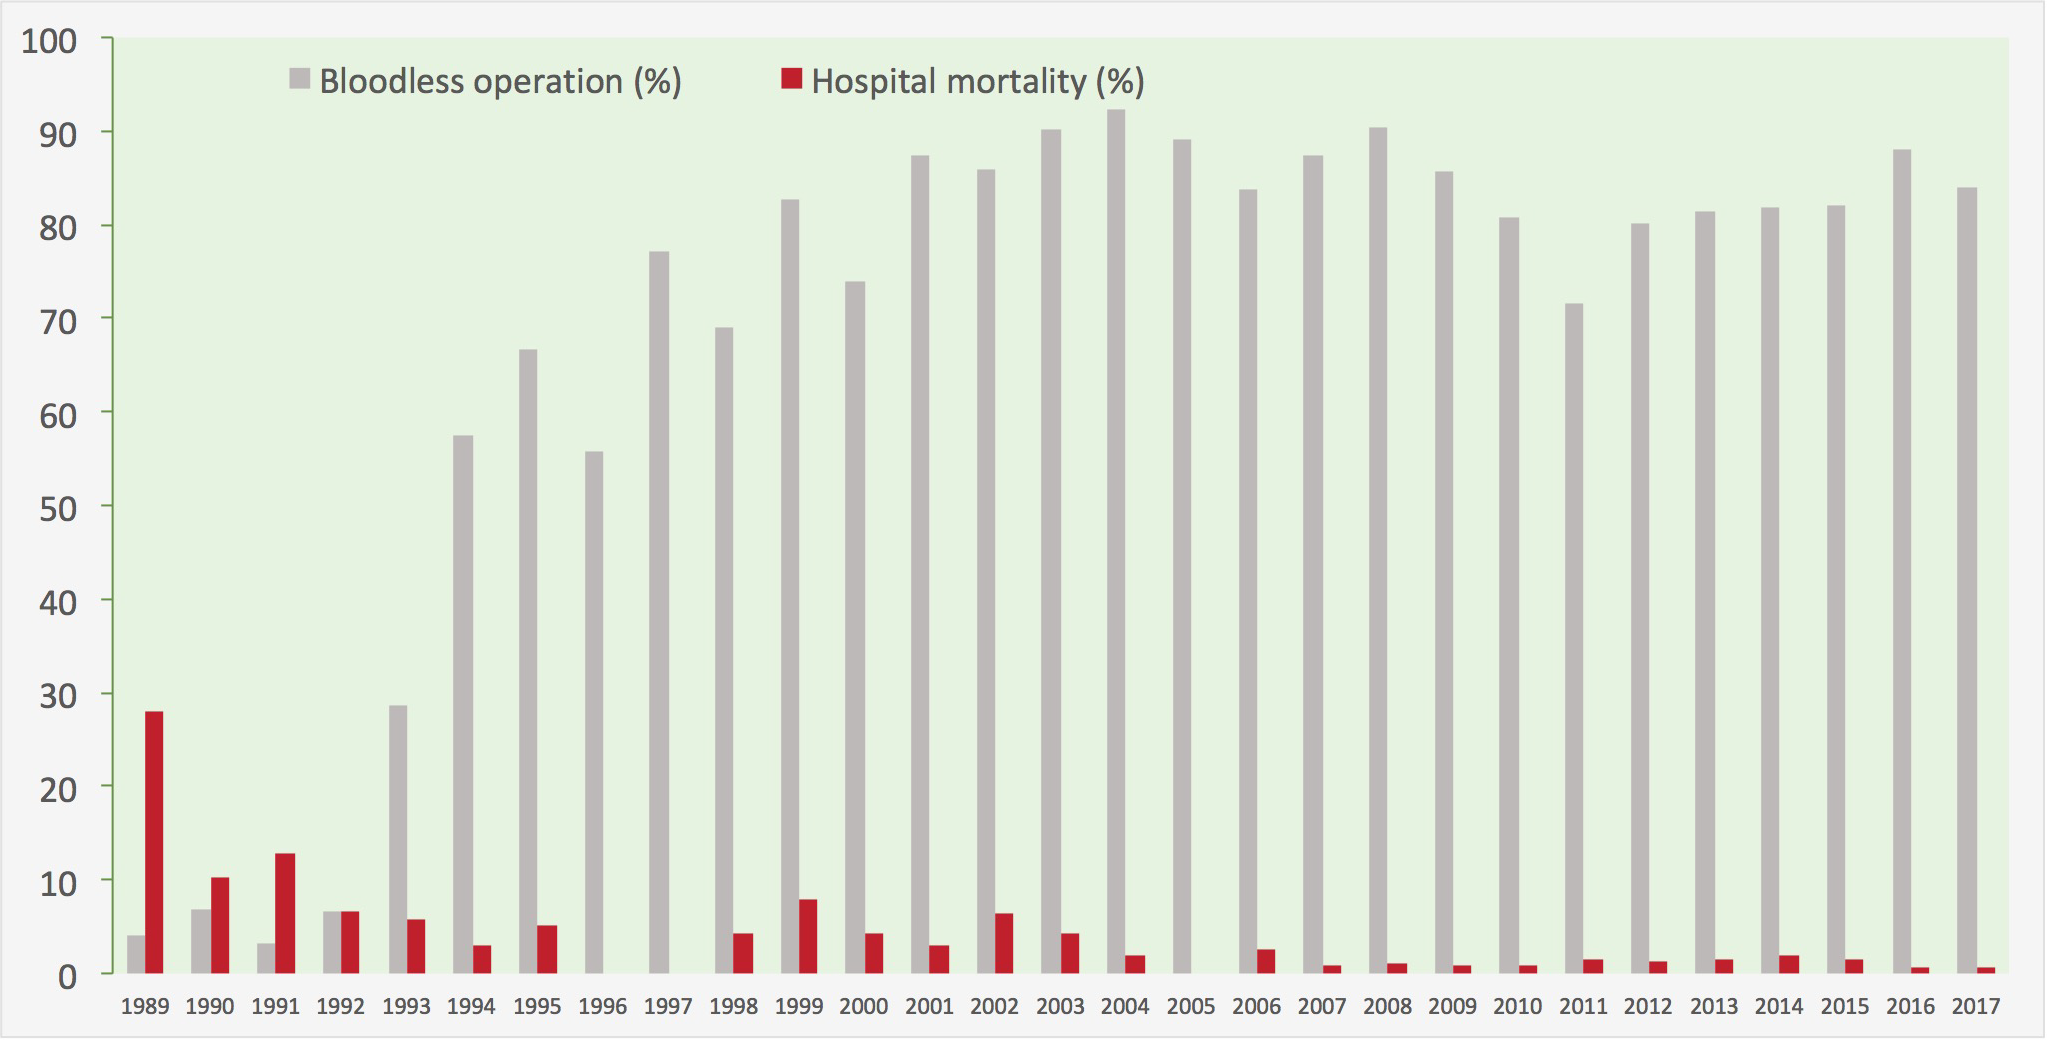 Hospital mortality rates and numbers of operations with no blood transfusion in hepatic resections for hepatocellular carcinoma in the past 28 years